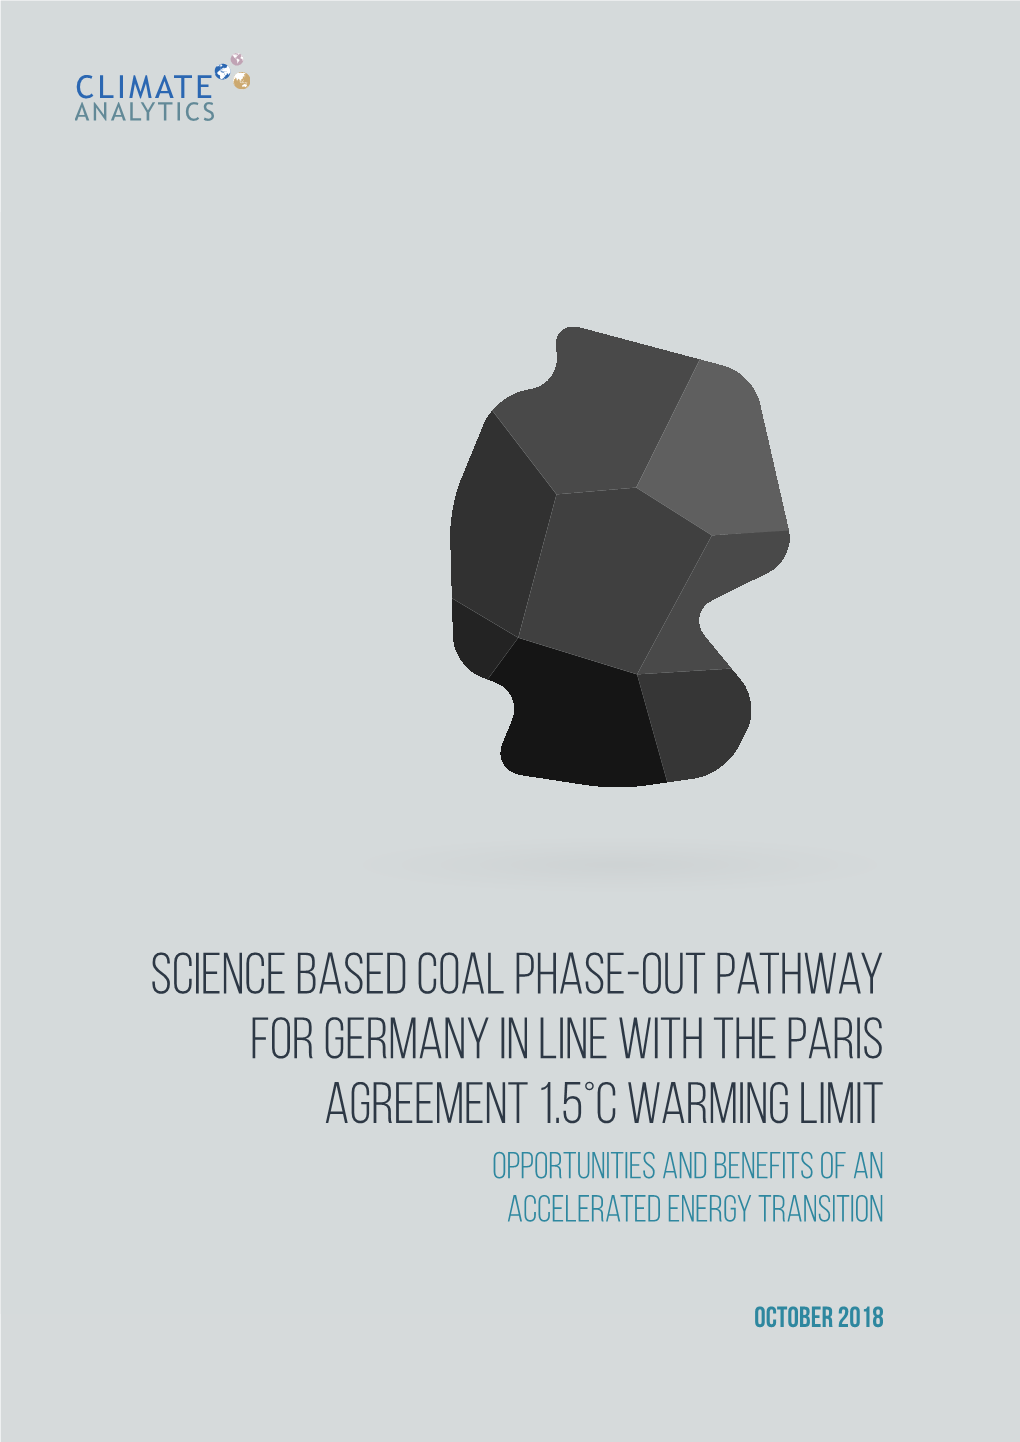 Science Based Coal Phase-Out Pathway for Germany in Line with the Paris Agreement 1.5°C Warming Limit Opportunities and Benefits of an Accelerated Energy Transition